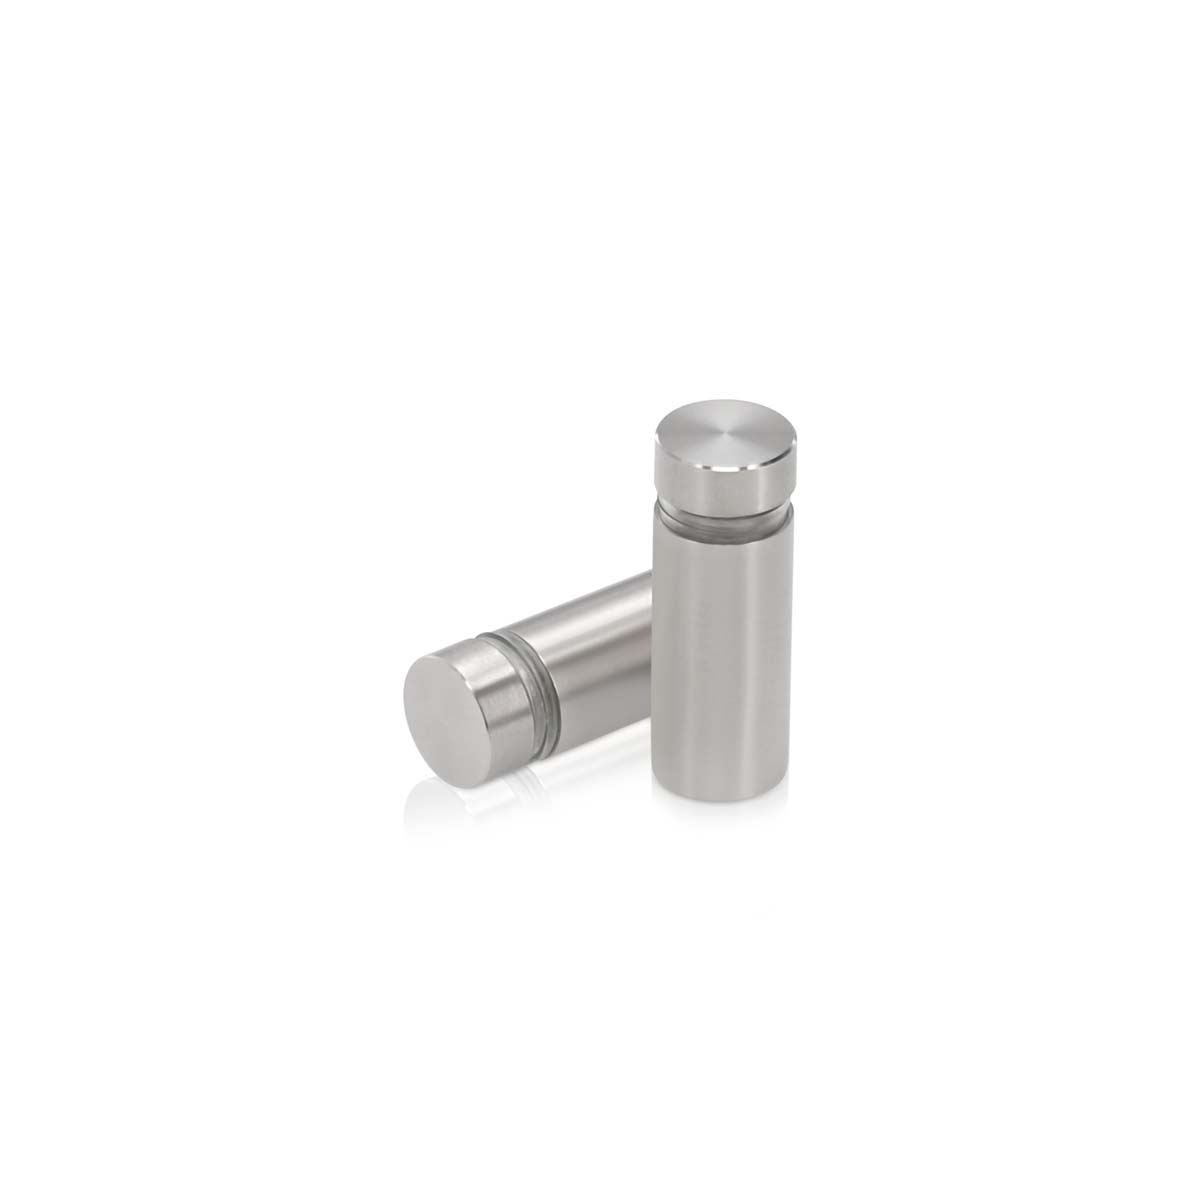 1/2'' Diameter X 1'' Barrel Length, Stainless Steel Brushed Finish. Easy Fasten Standoff (For Inside Use Only) [Required Material Hole Size: 3/8'']